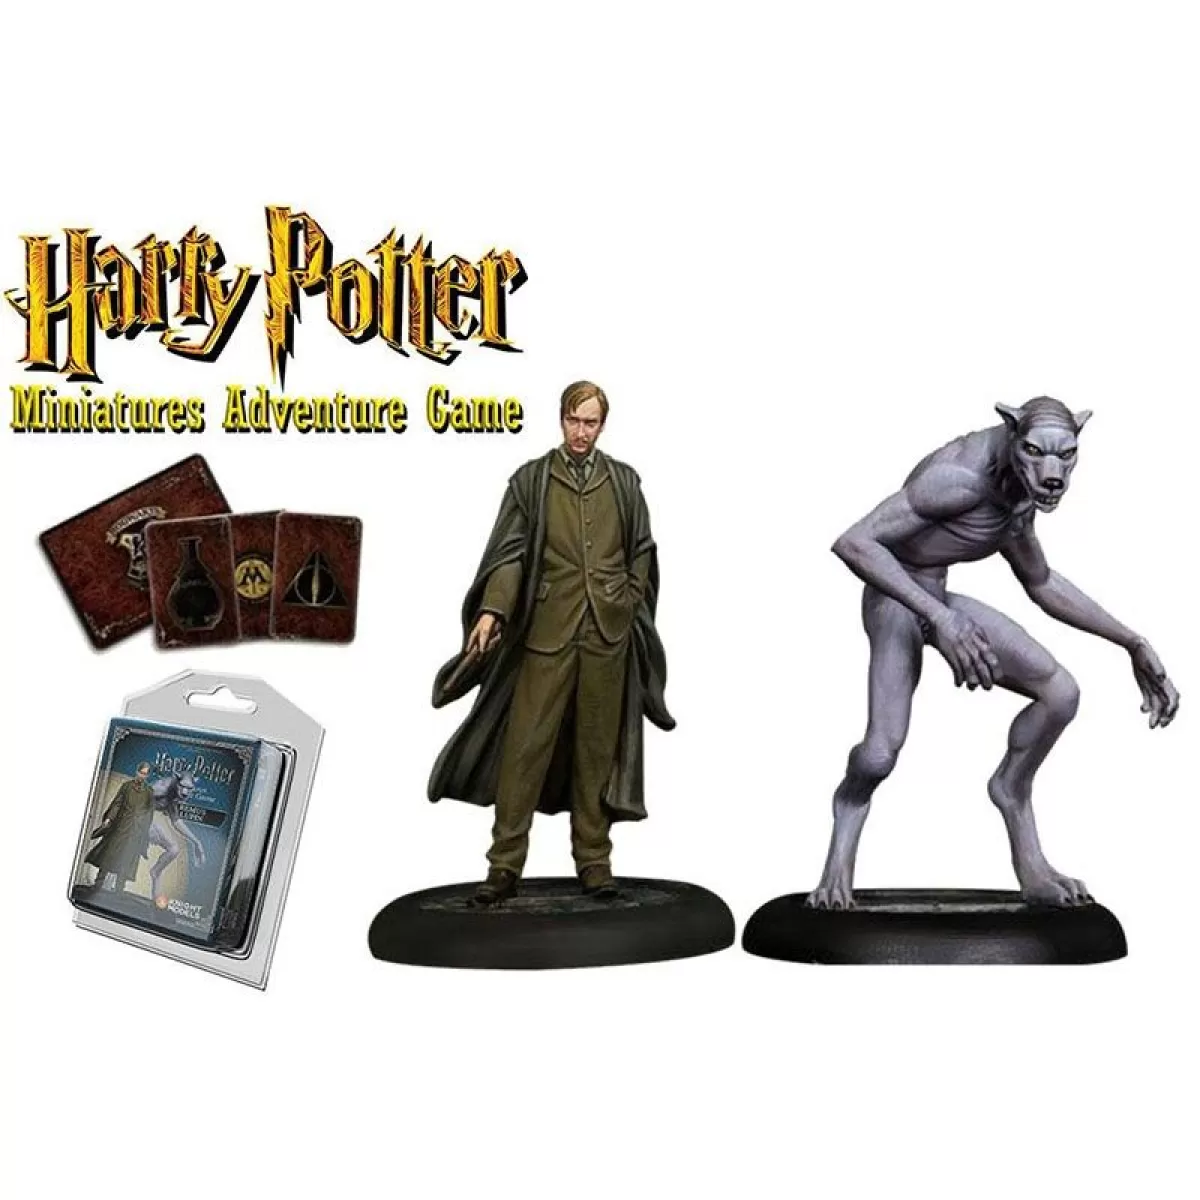 Harry potter miniatures adventure game: Remus lupin